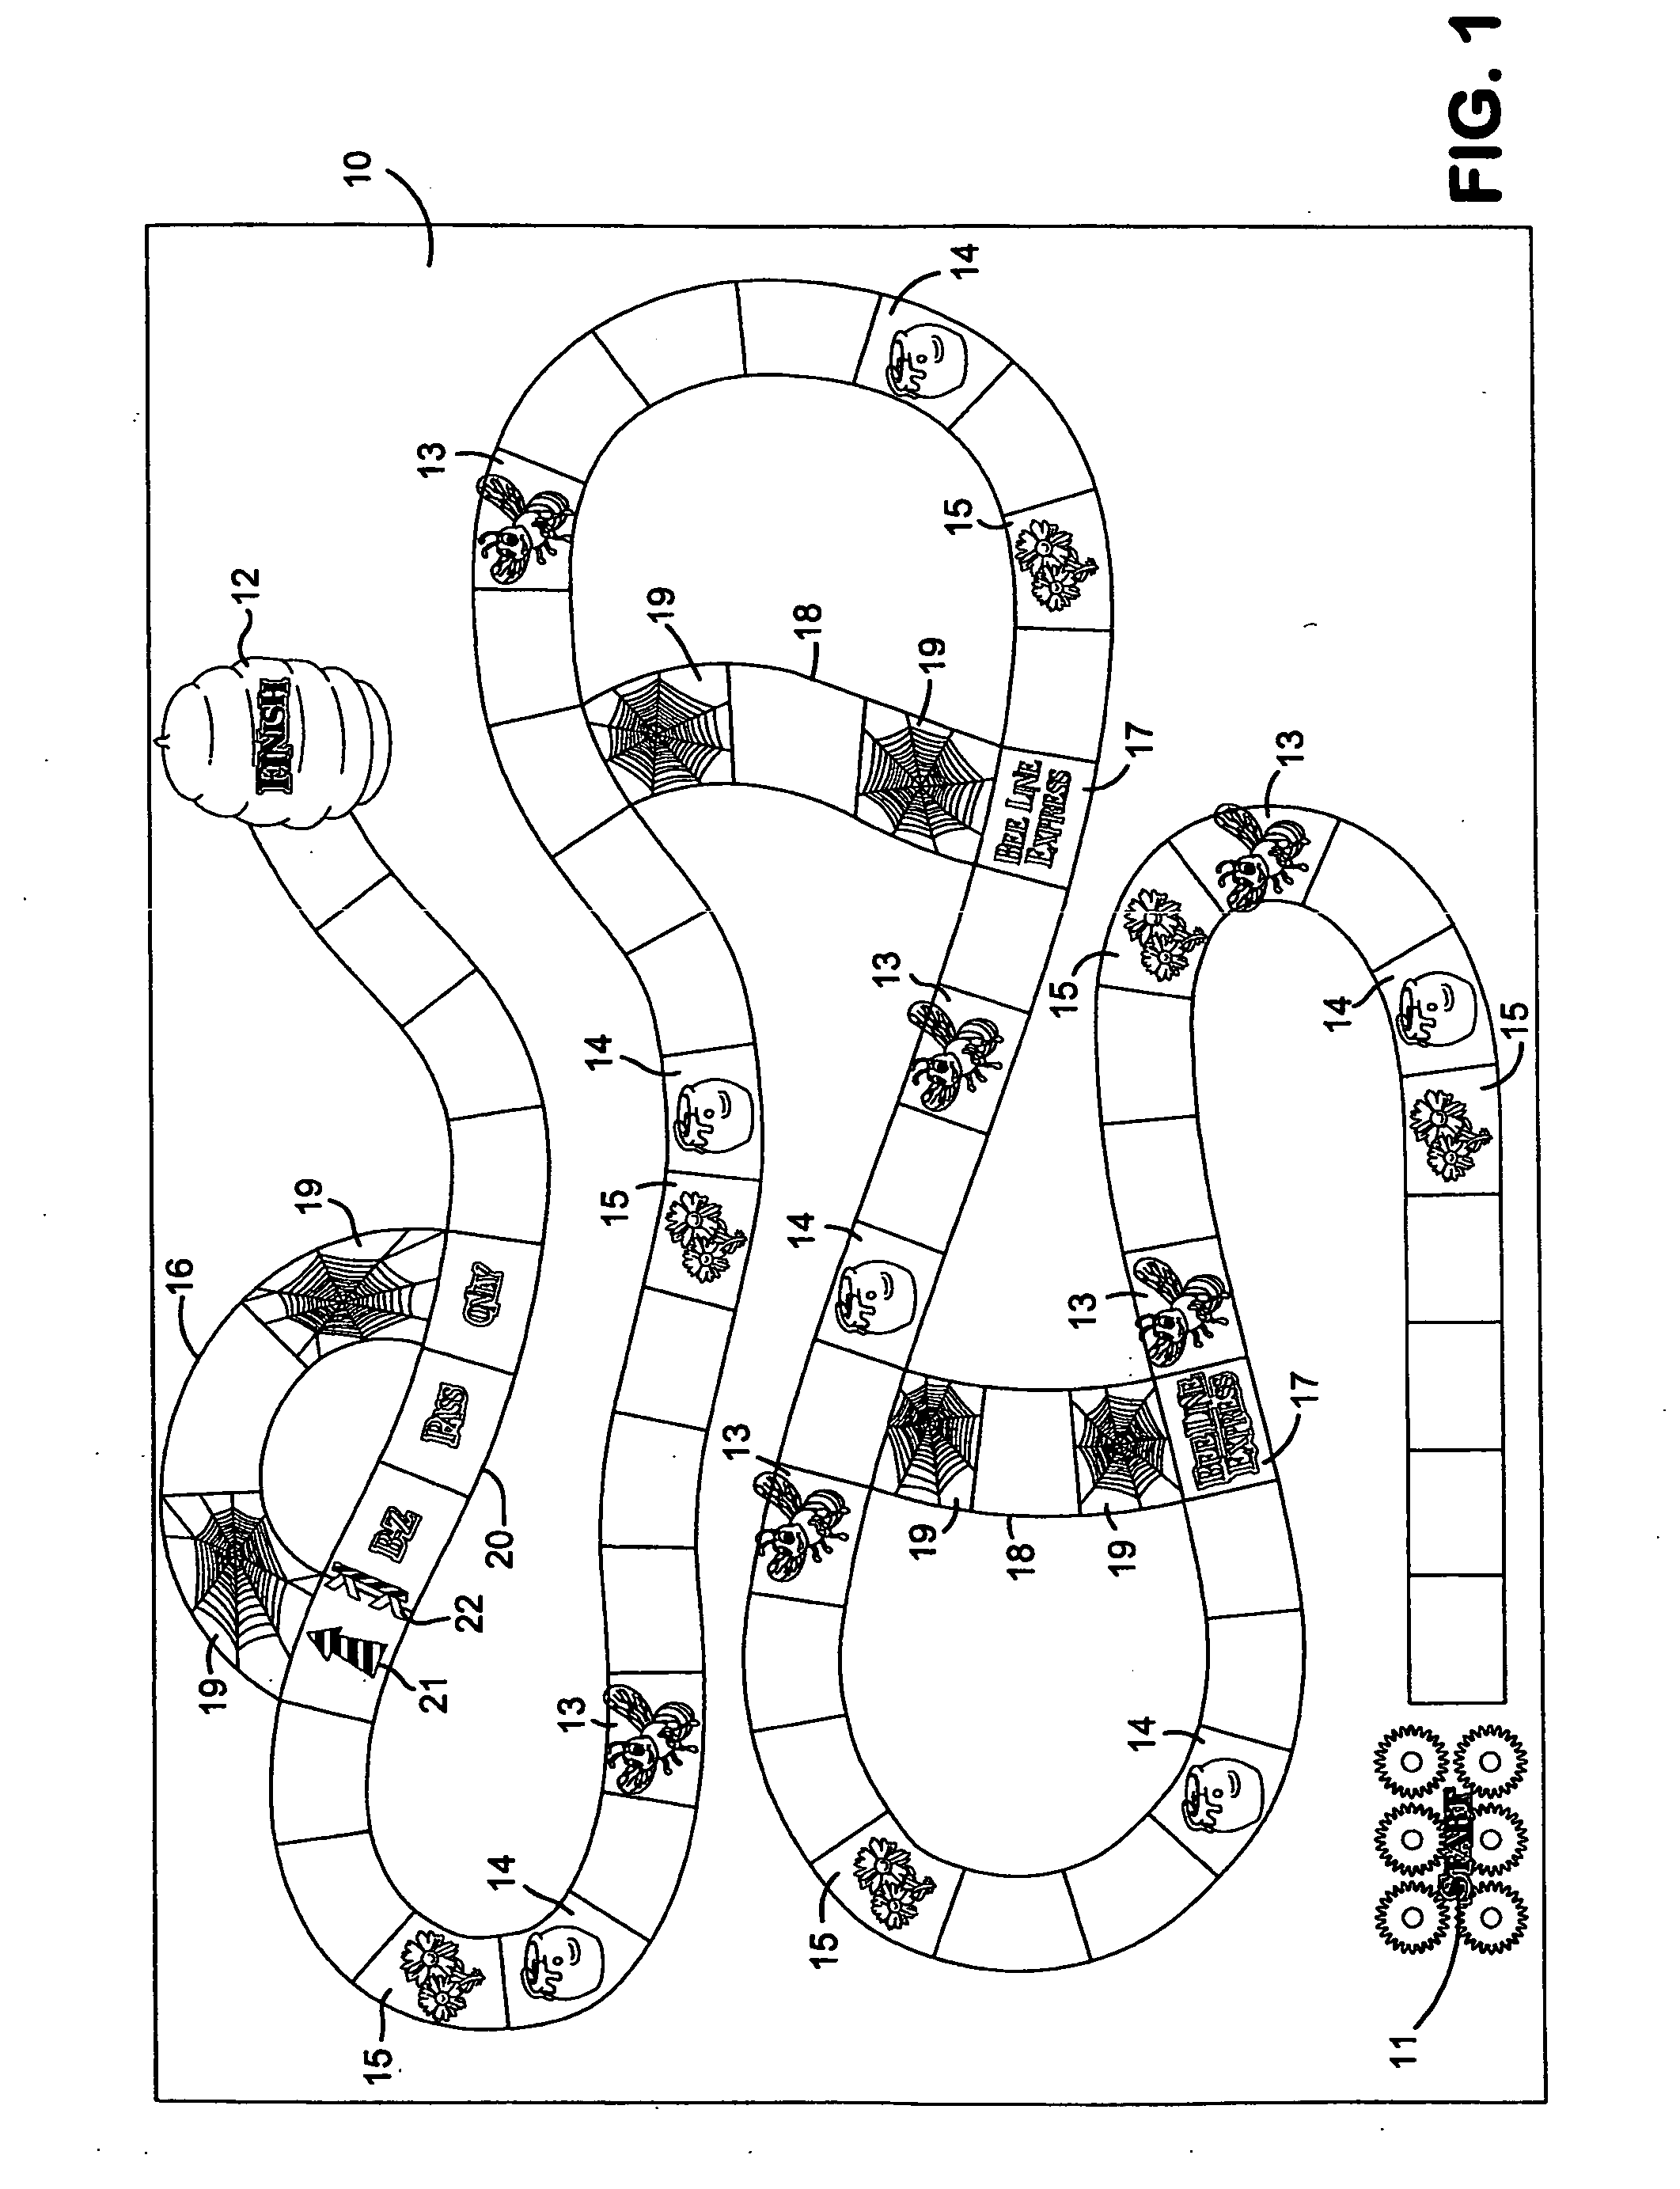 Methods and apparatus for educational spelling games